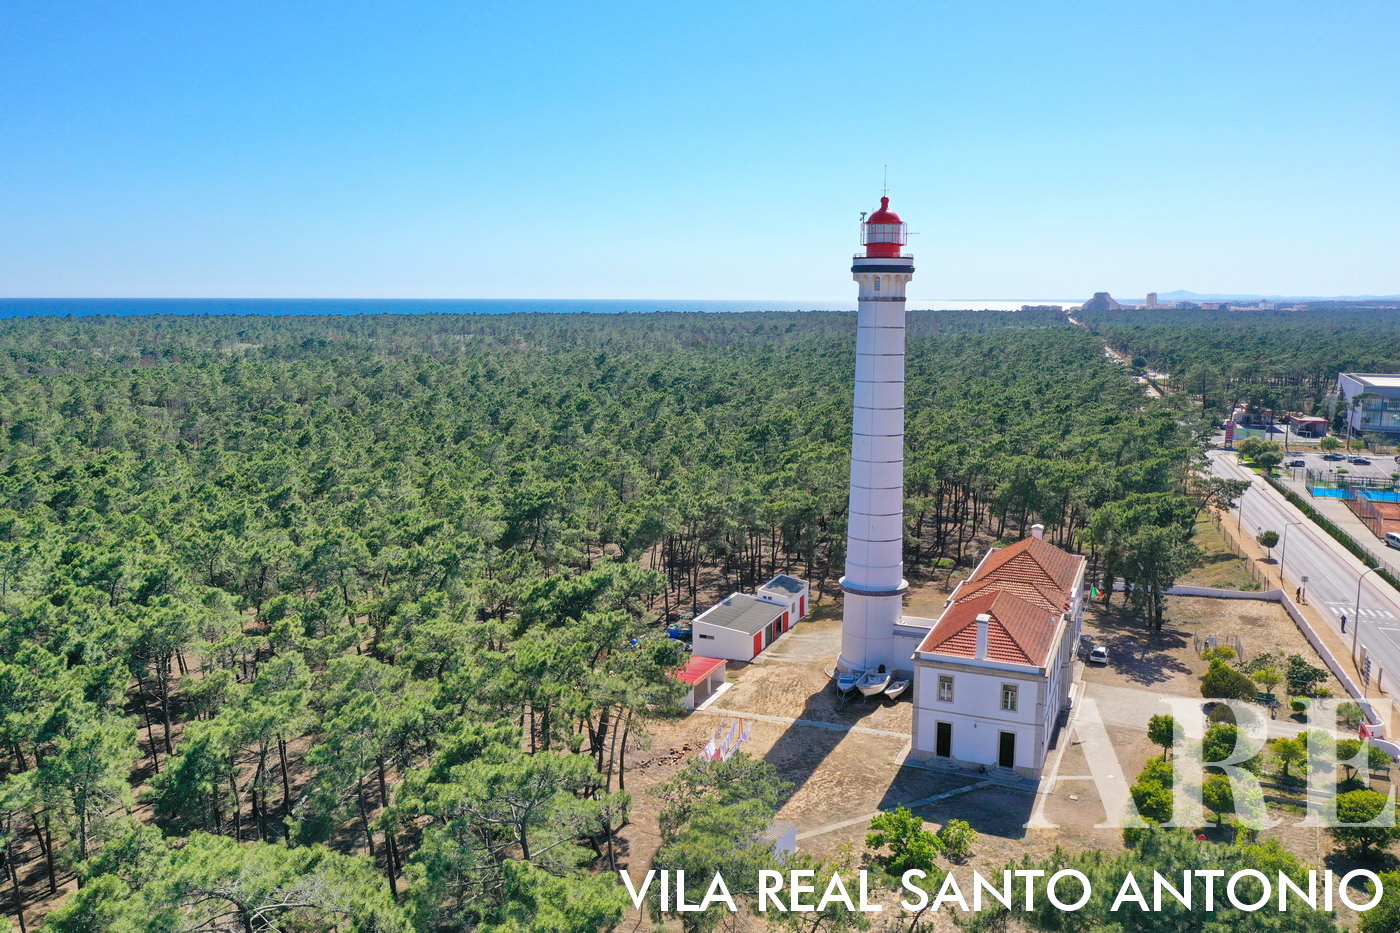 The Lighthouse Encircled by Pine Forest of Vila Real de Santo António